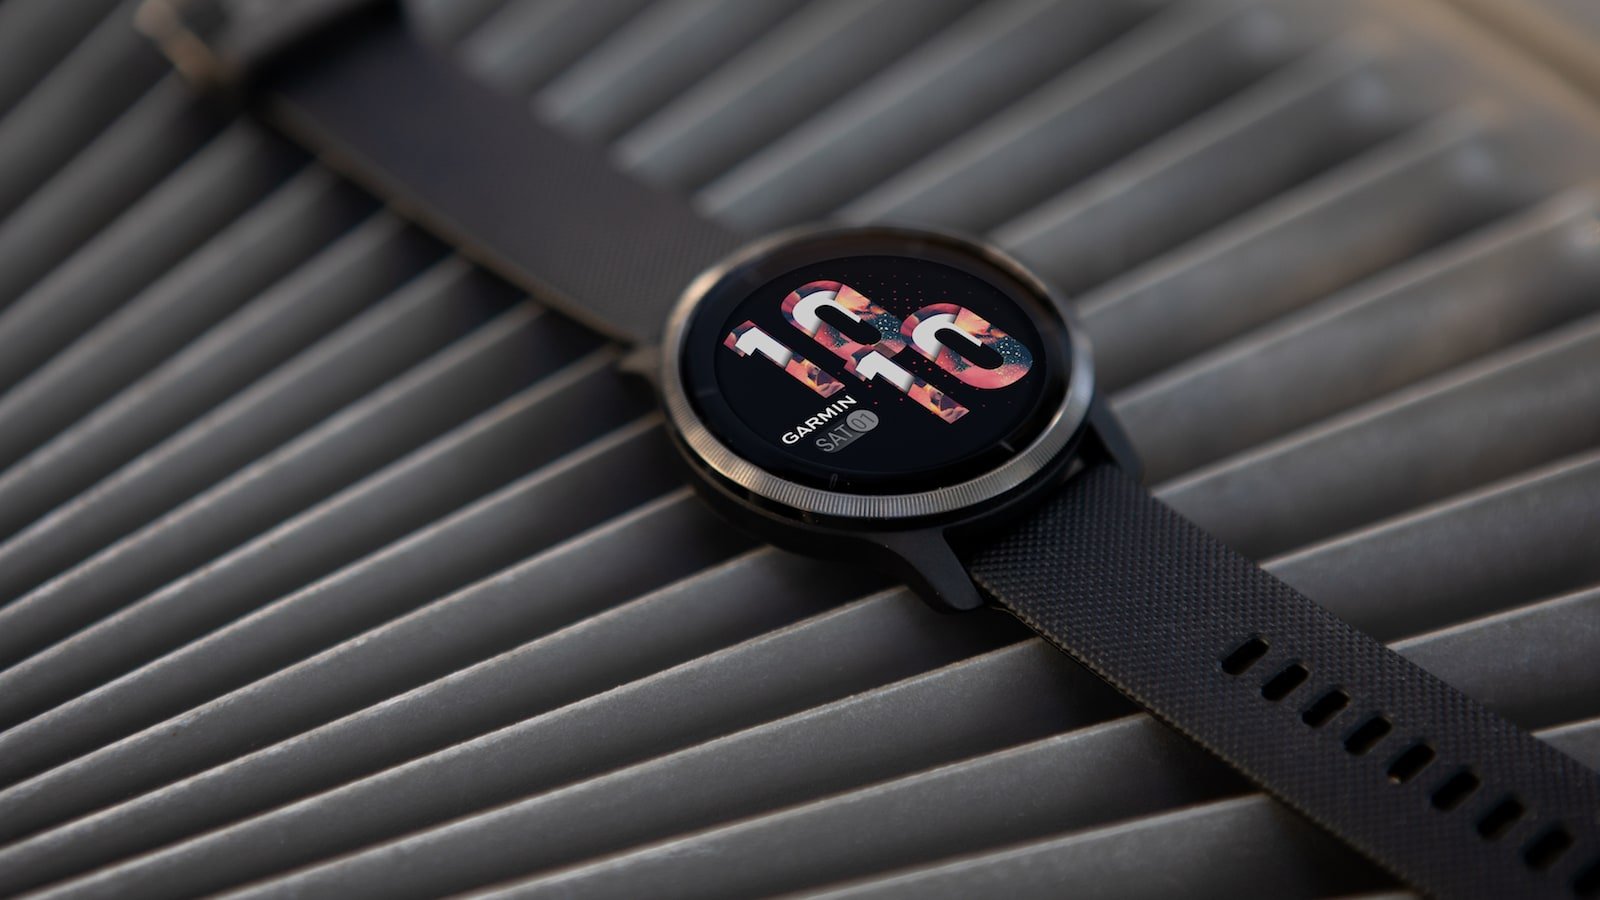 Best smartwatches to buy in 2021